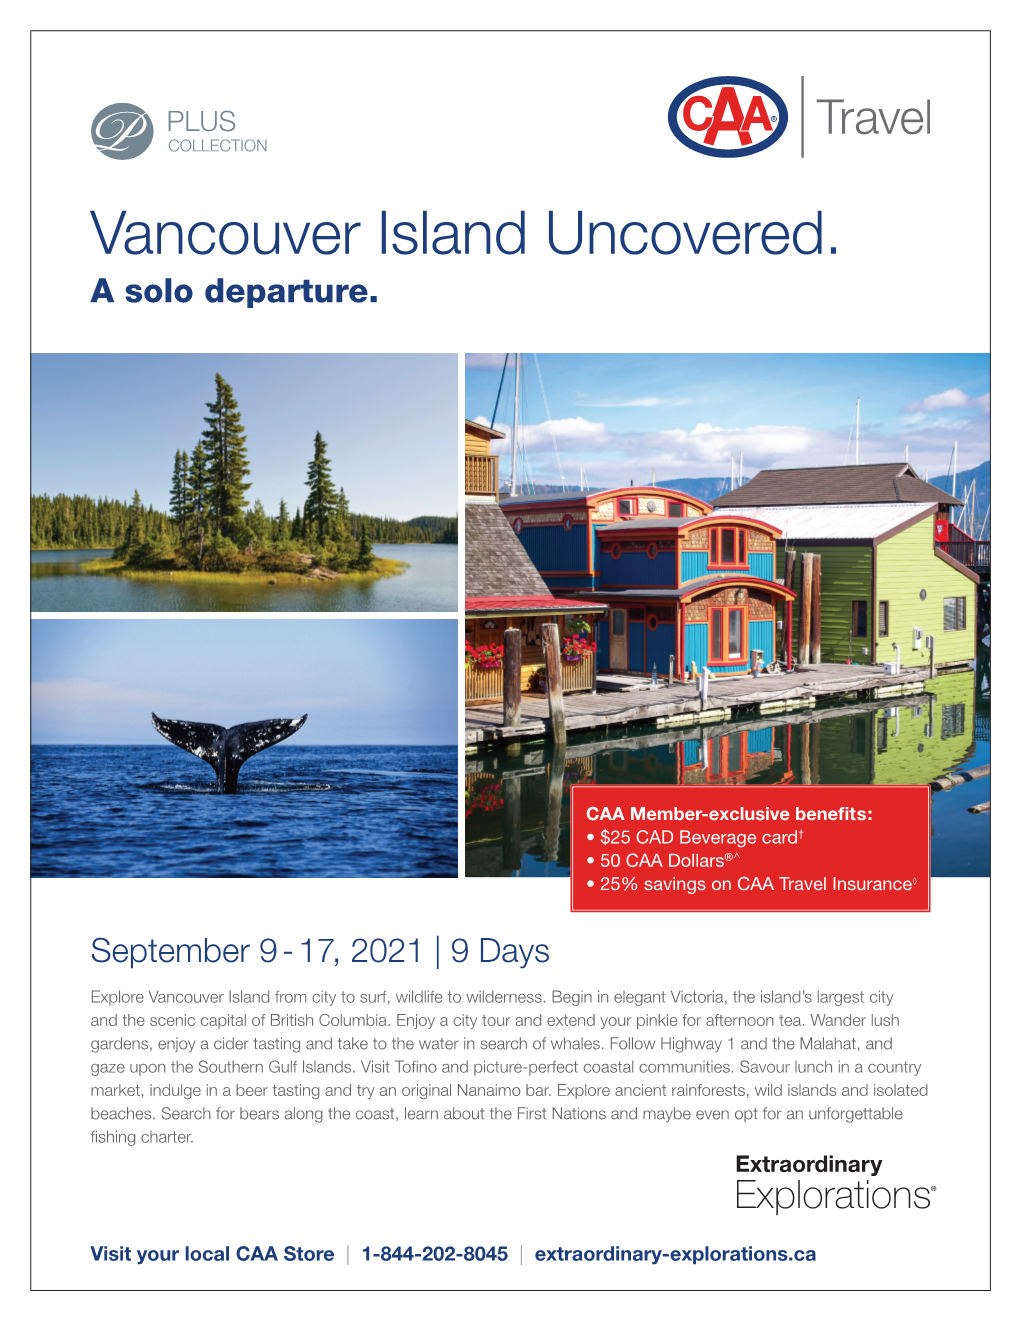 Vancouver Island Uncovered. a Solo Departure